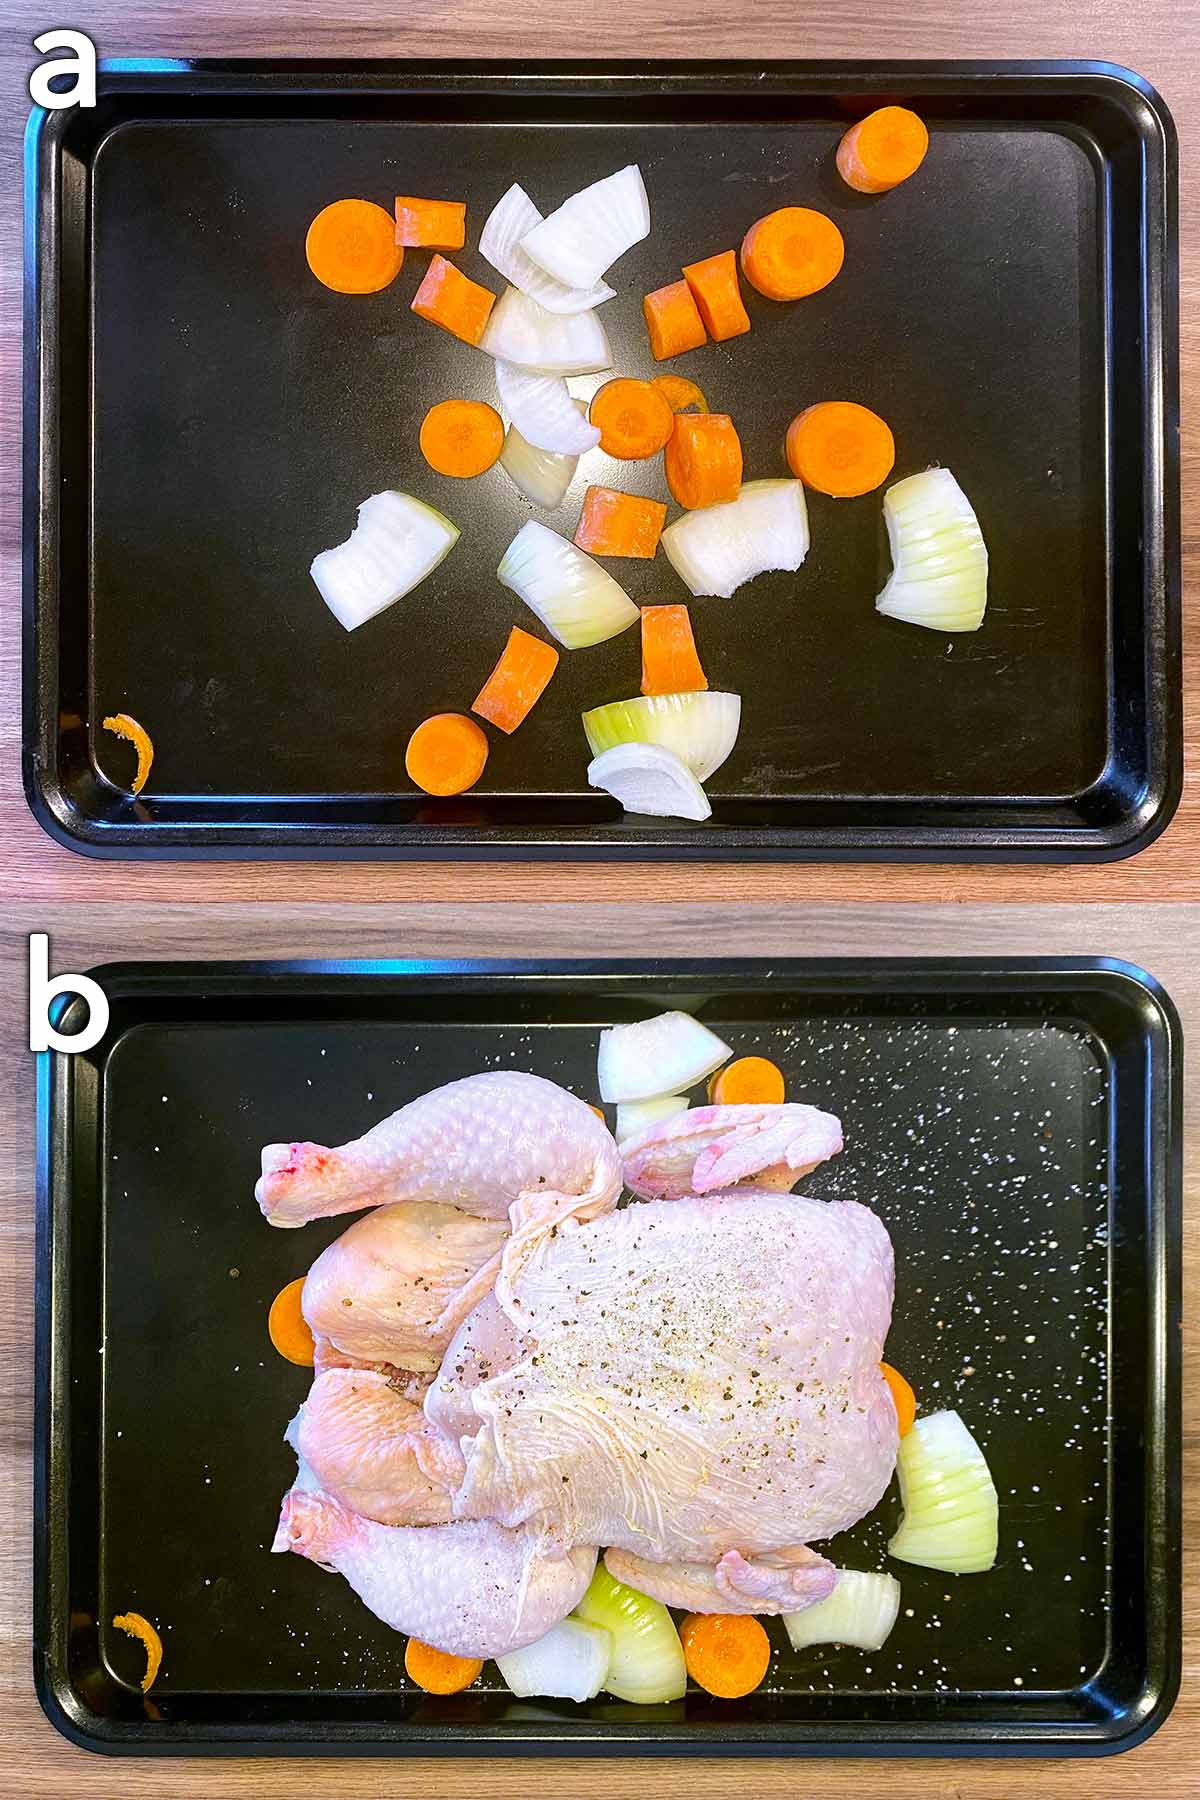 Two shot collage of chopped carrots and onions on a baking tray then with a chicken on top.